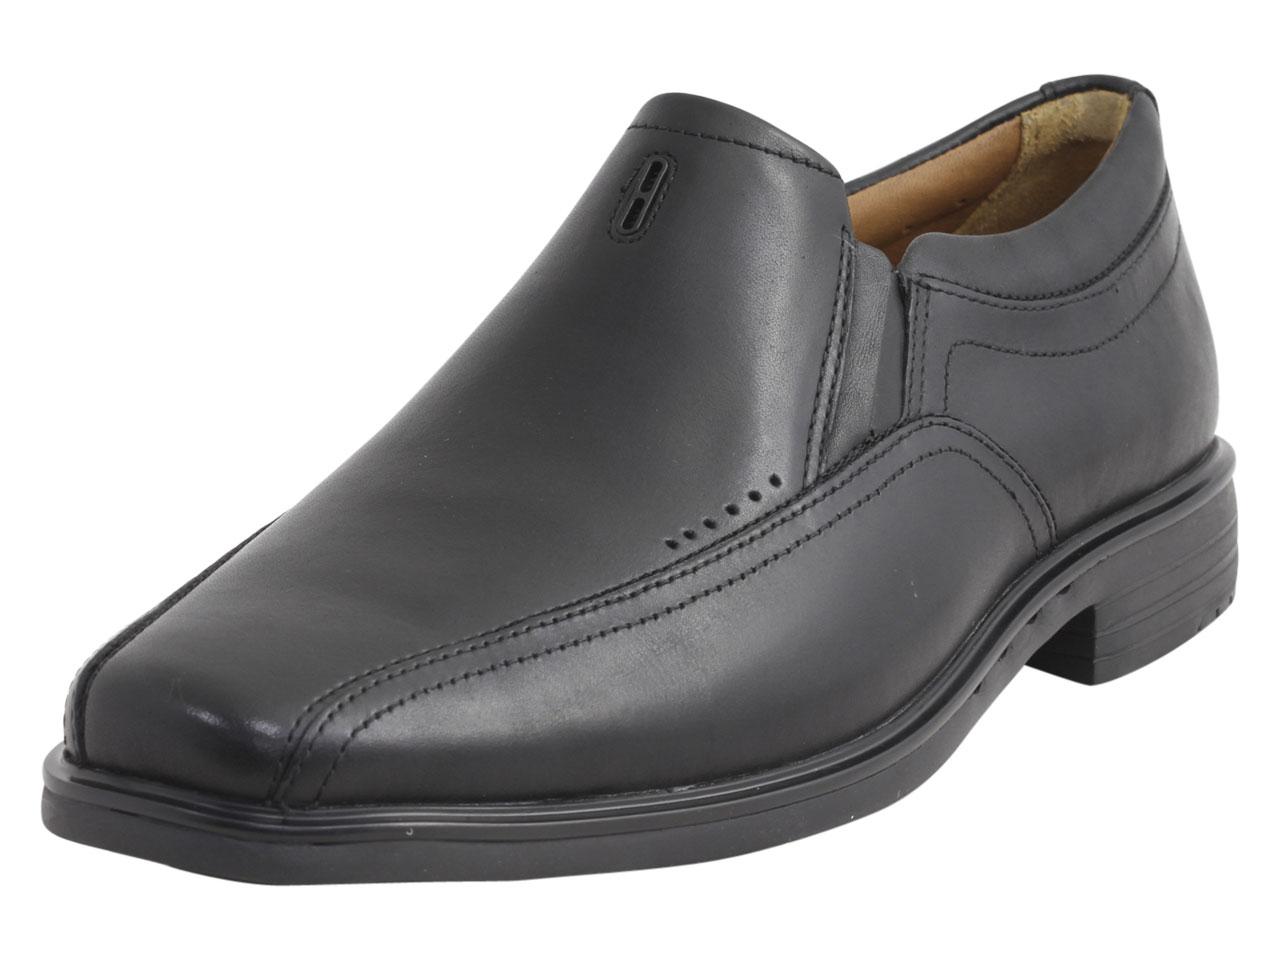 clarks unstructured shoes canada